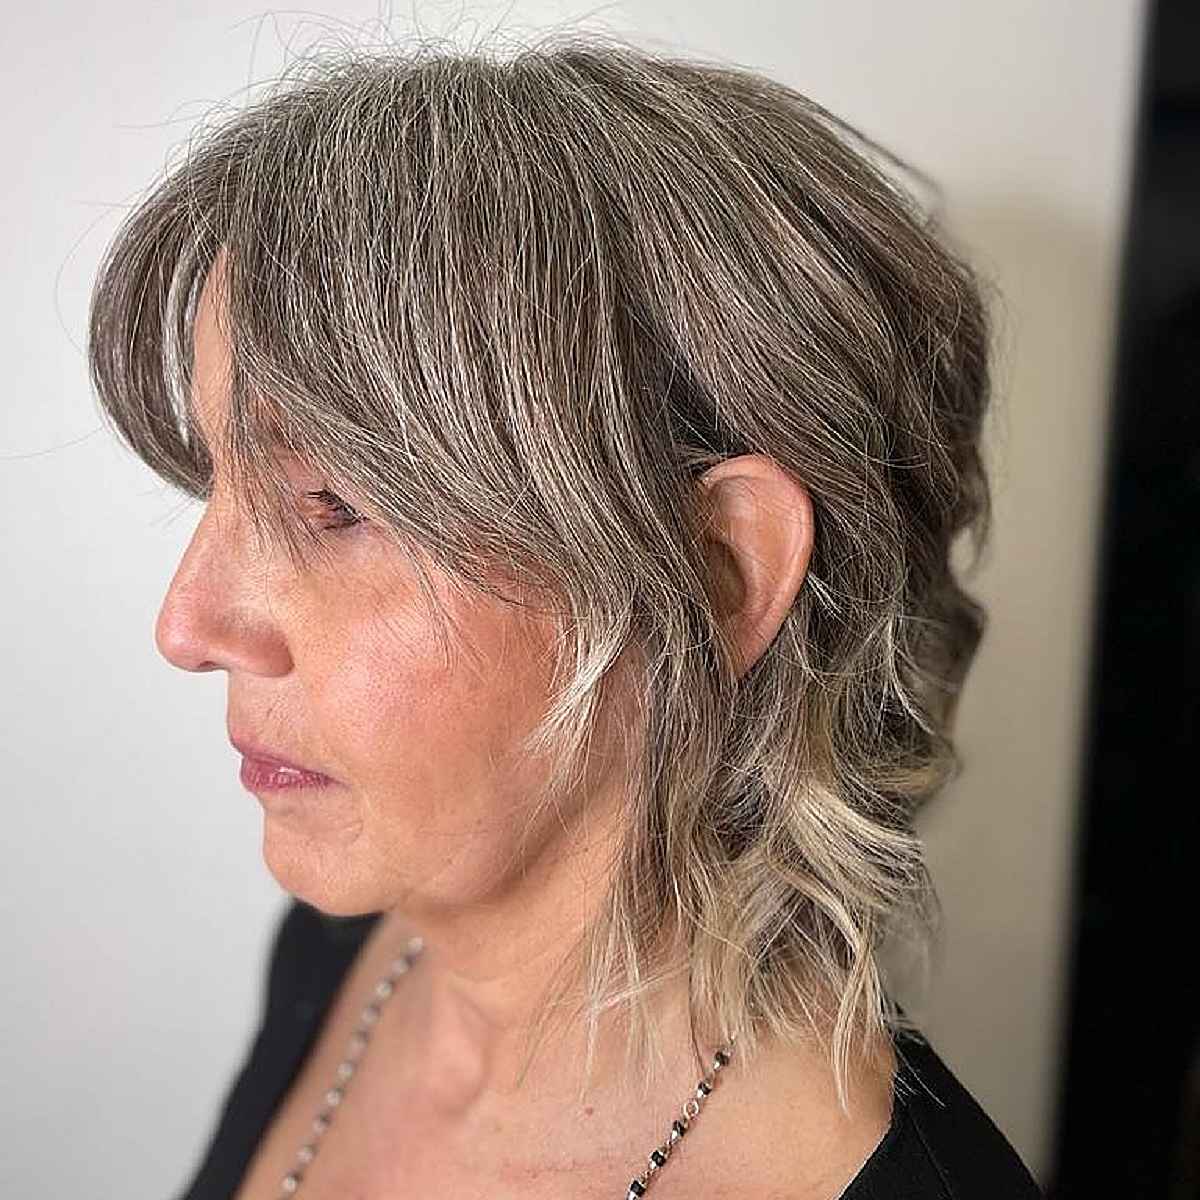 Mini Shaggy Mullet with Curtain Bangs for Grey Hair